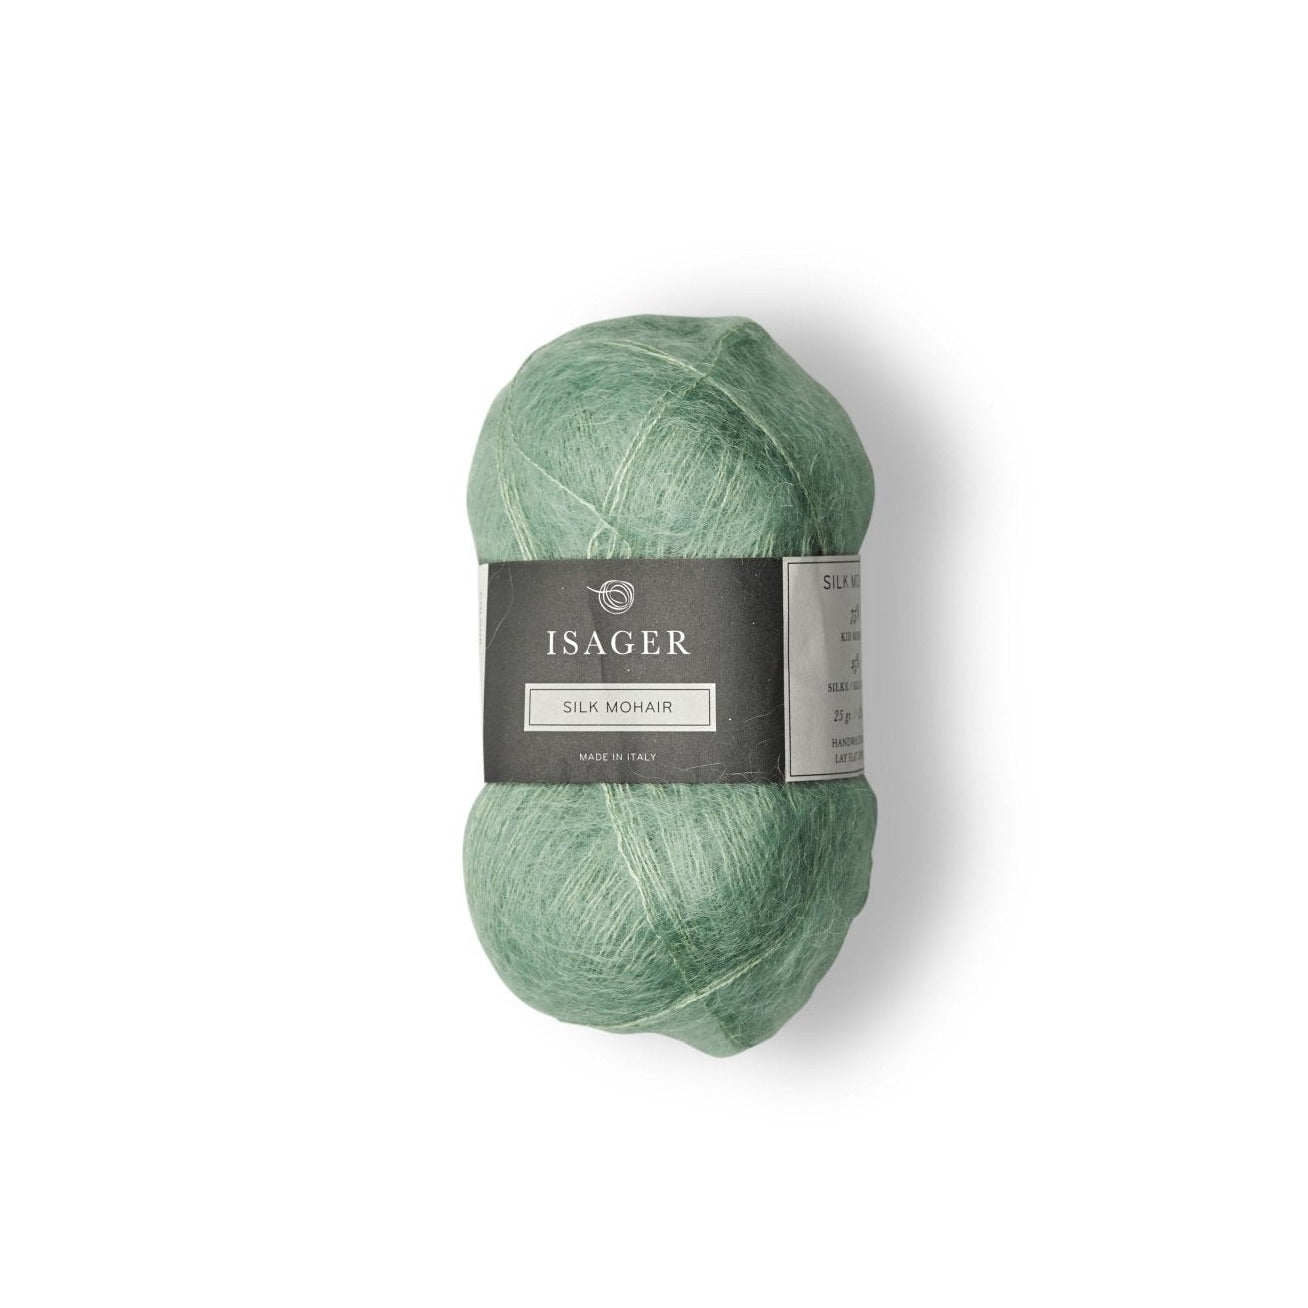 Isager Silk Mohair - 67 - 2 Ply - Isager - The Little Yarn Store